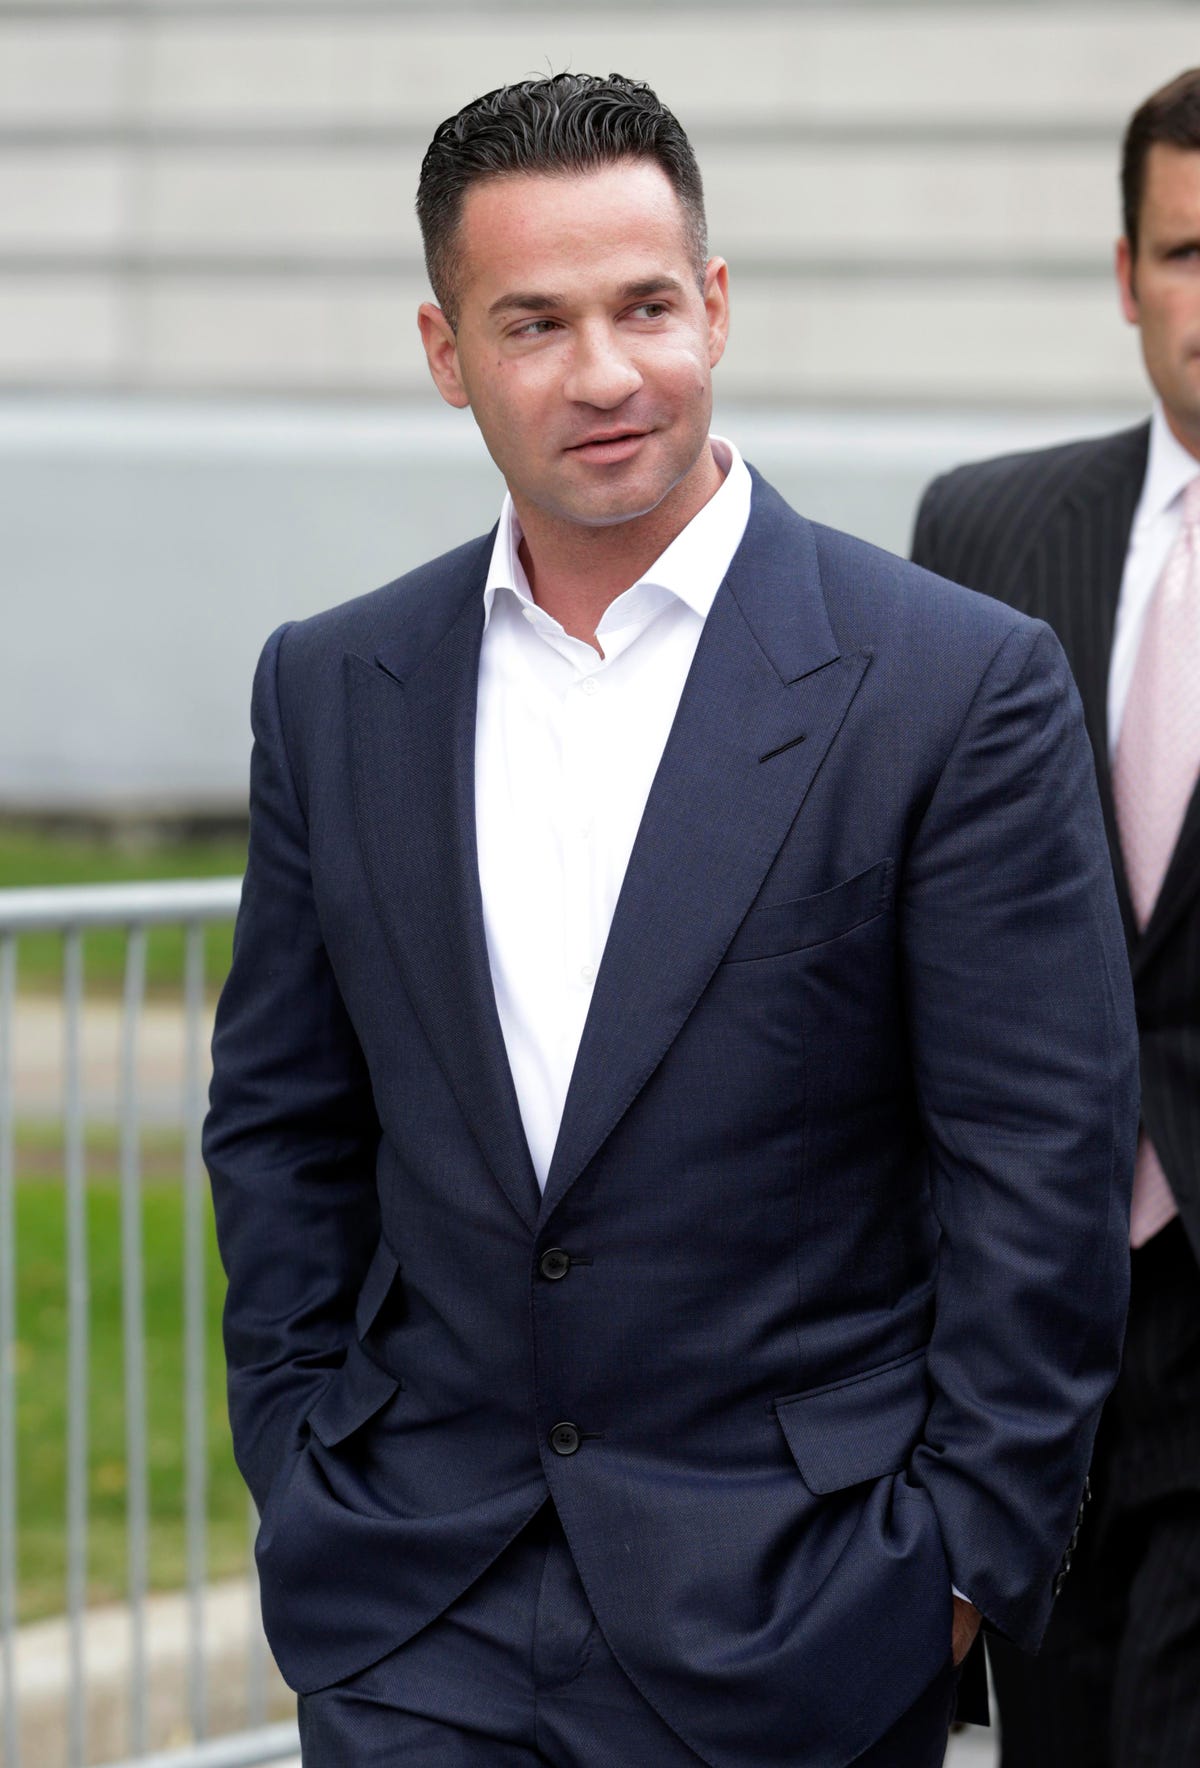 Mike ‘The Situation’ Sorrentino